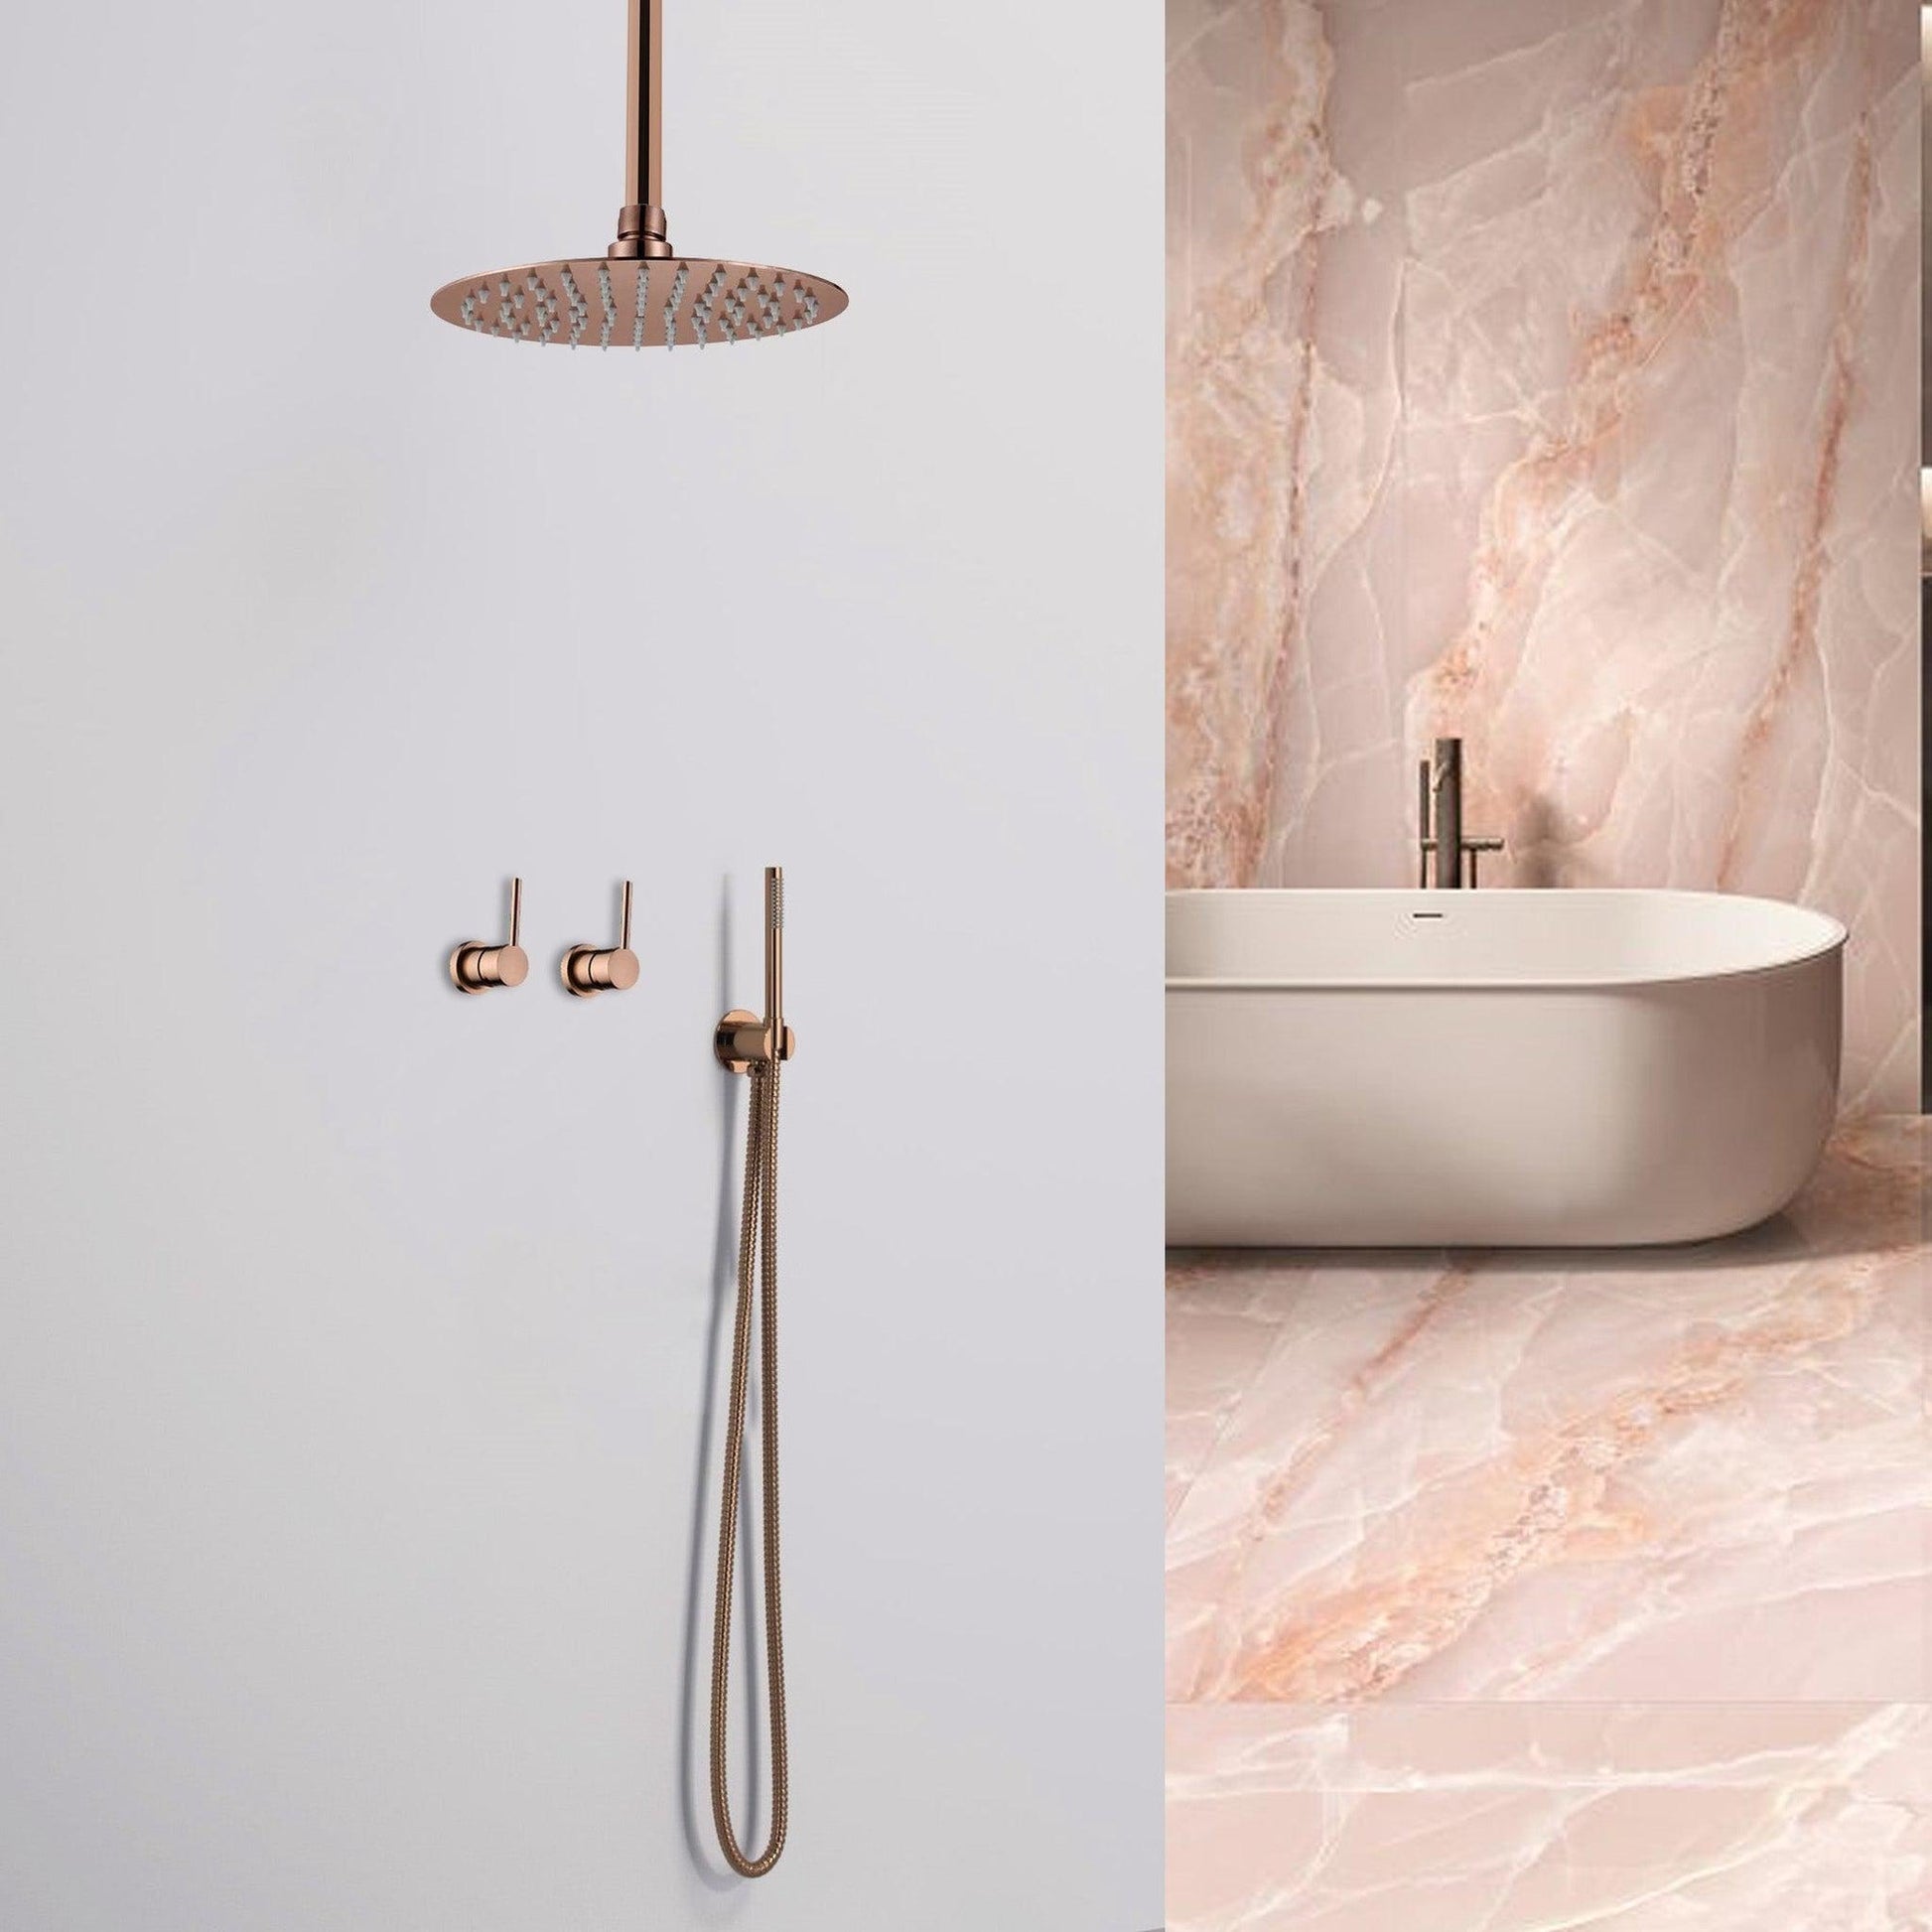 https://usbathstore.com/cdn/shop/files/FontanaShowers-Verona-Creative-Luxury-Rose-Gold-Round-Ceiling-Mounted-Solid-Brass-Shower-Head-Rainfall-Shower-System-With-Dual-Mixer-and-Hand-Shower-2.jpg?v=1683630806&width=1946